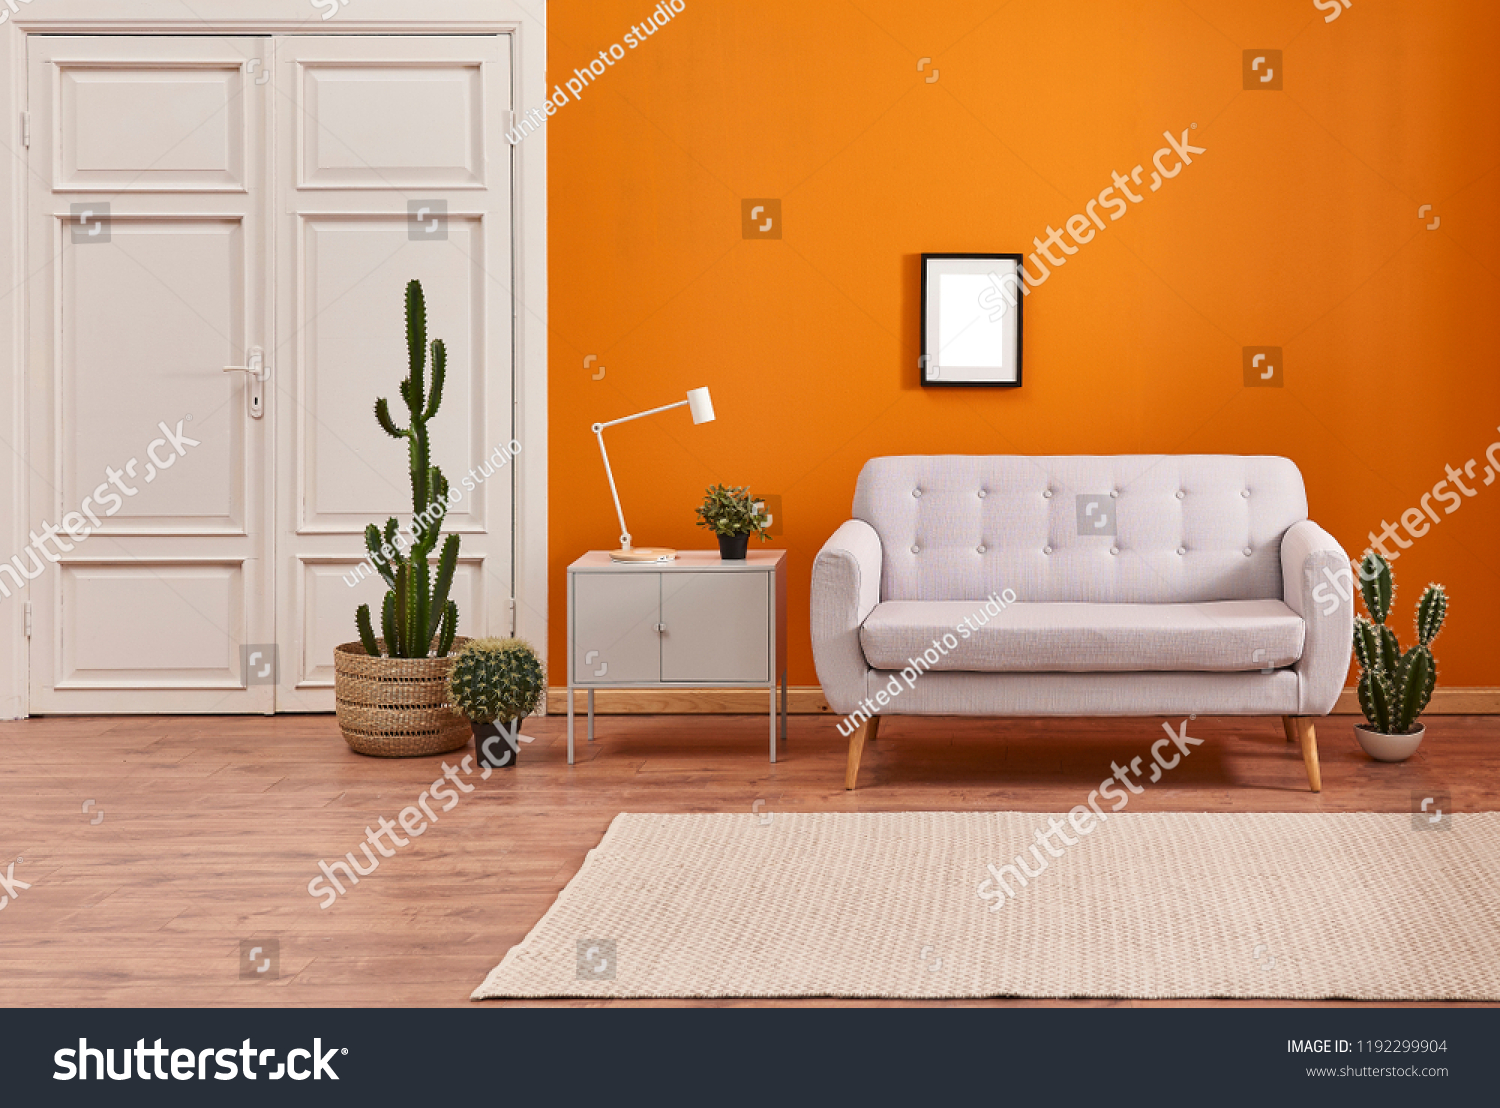 Orange living room and orange wall background light grey sofa and avangard white door. Modern home decoration brown parquet and carpet design. #1192299904